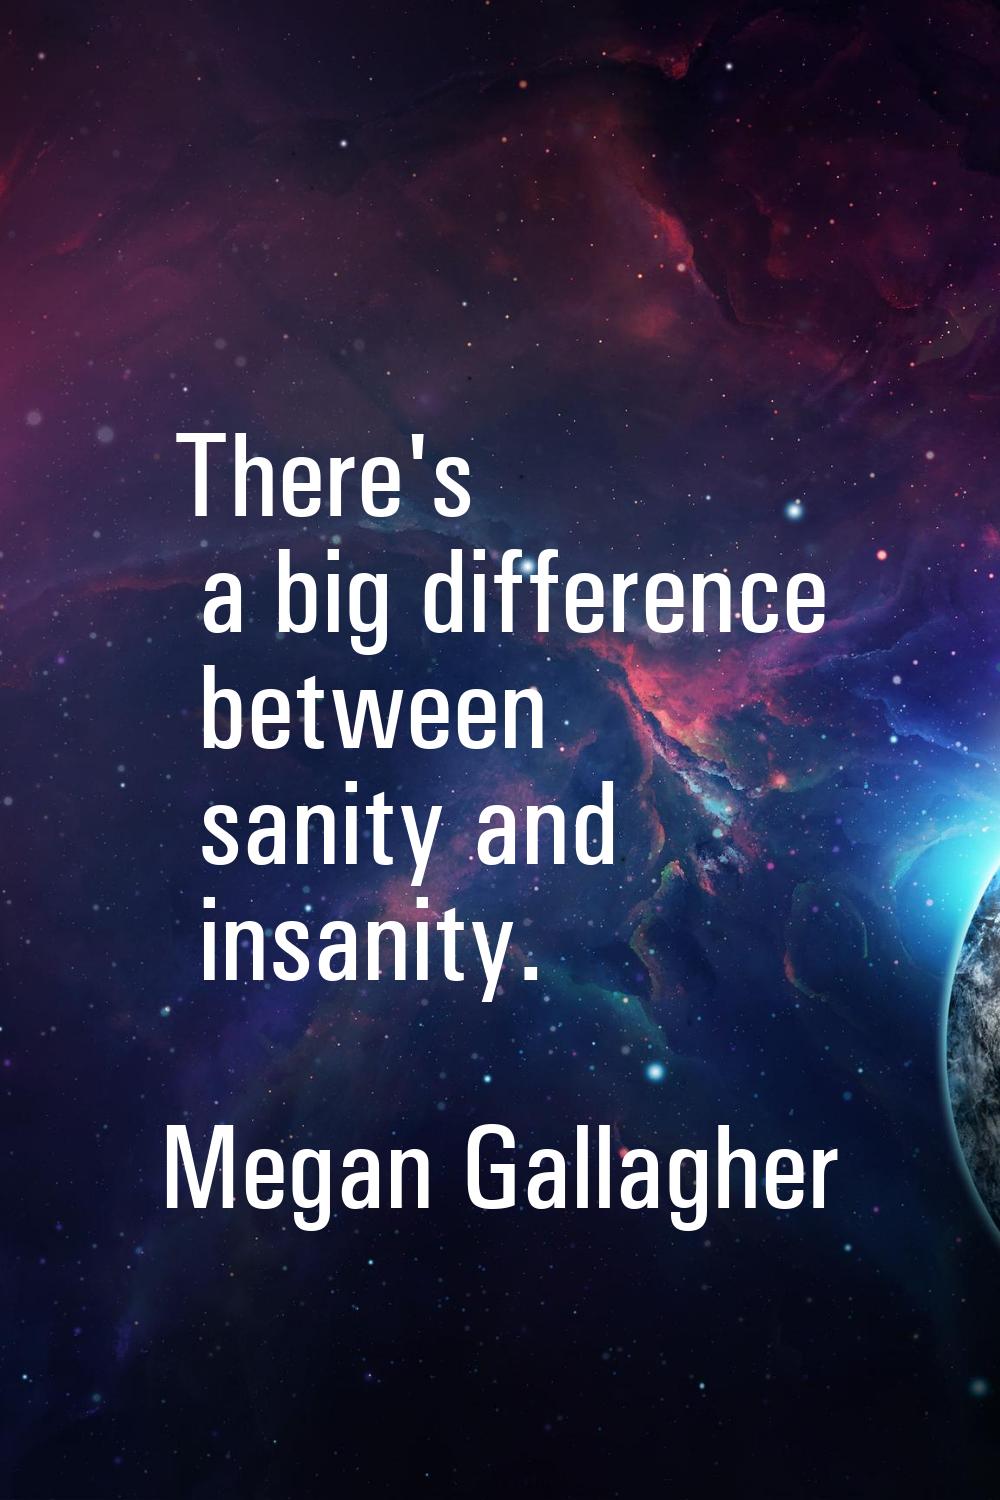 There's a big difference between sanity and insanity.